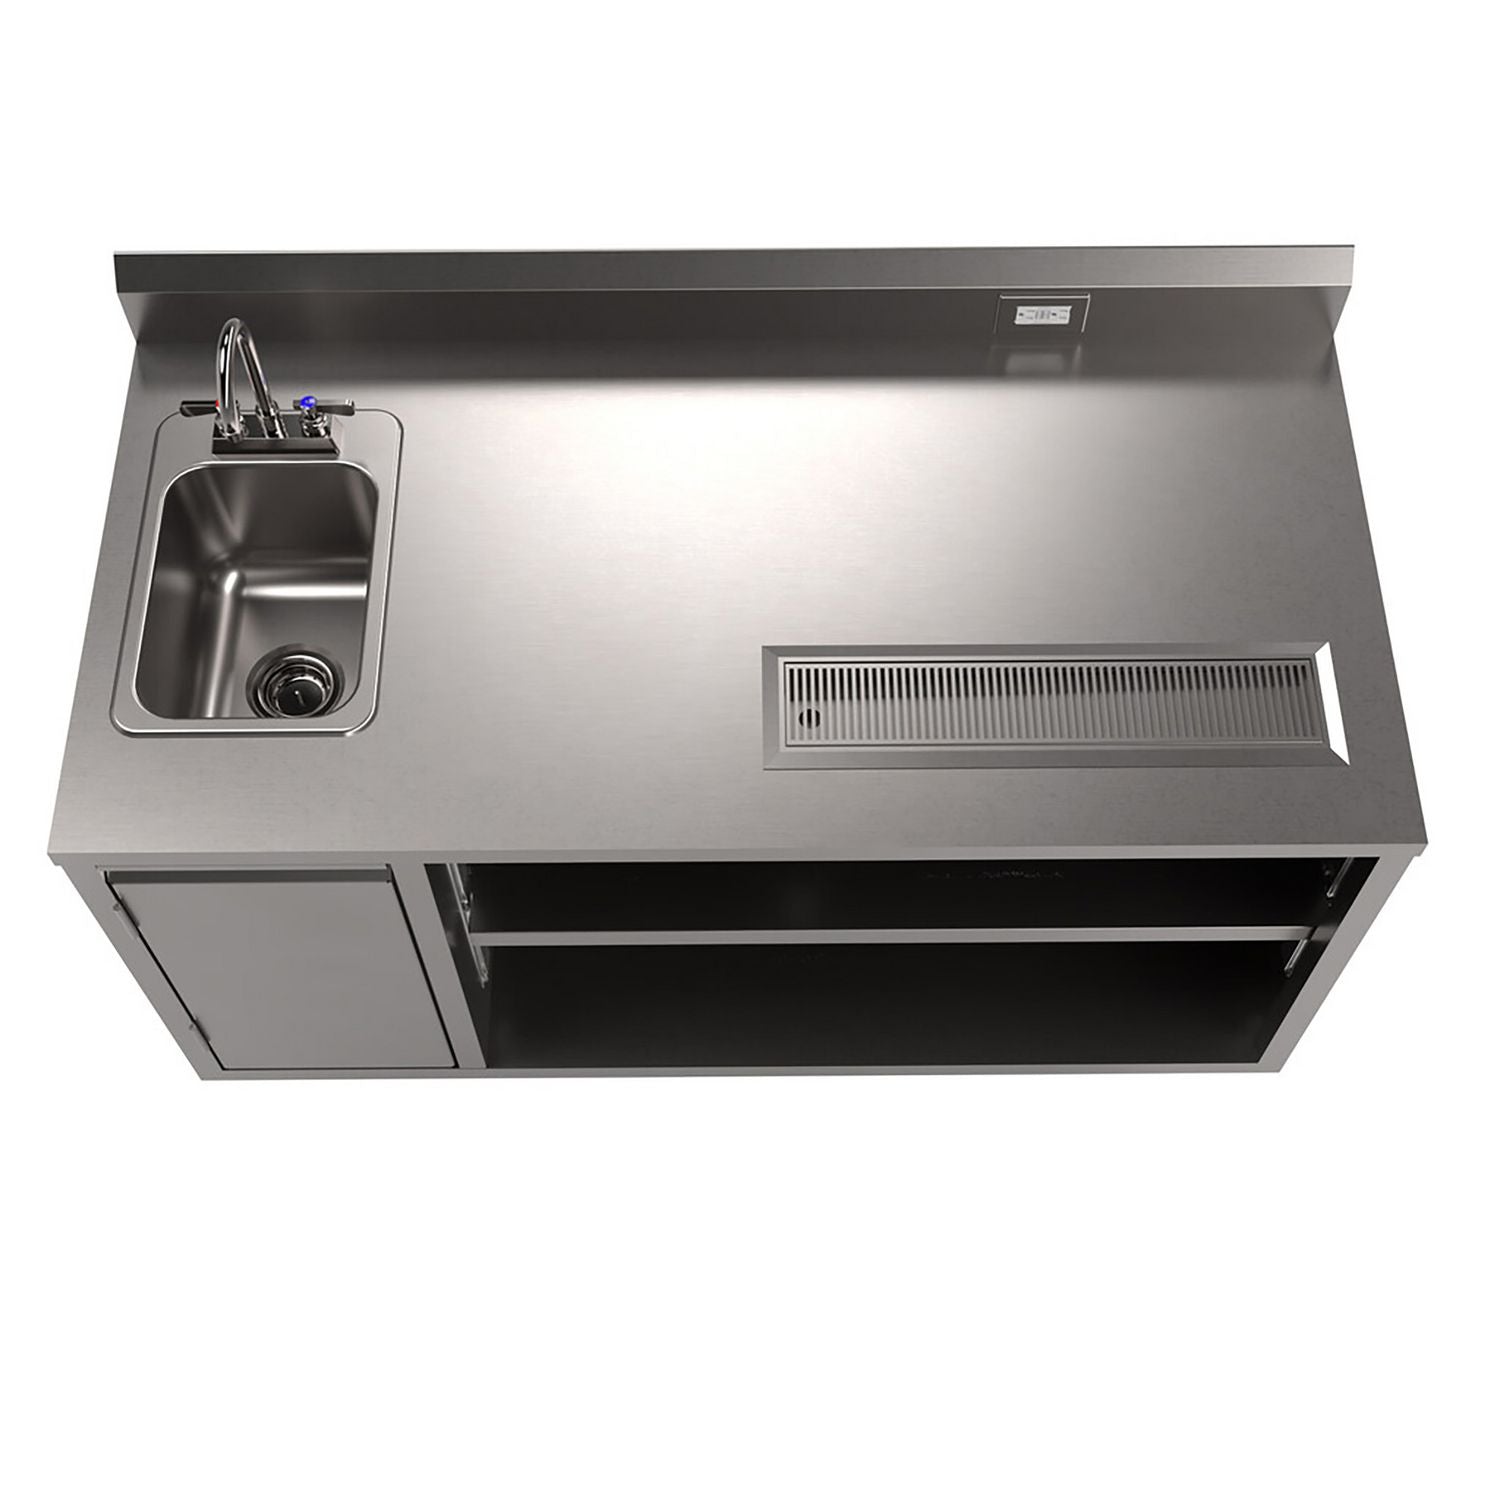 stainless-steel-beverage-table-with-left-sink-rectangular-30-x-60-x-415-silver-top-base-ships-in-4-6-business-days_bkebevt3060l - 3